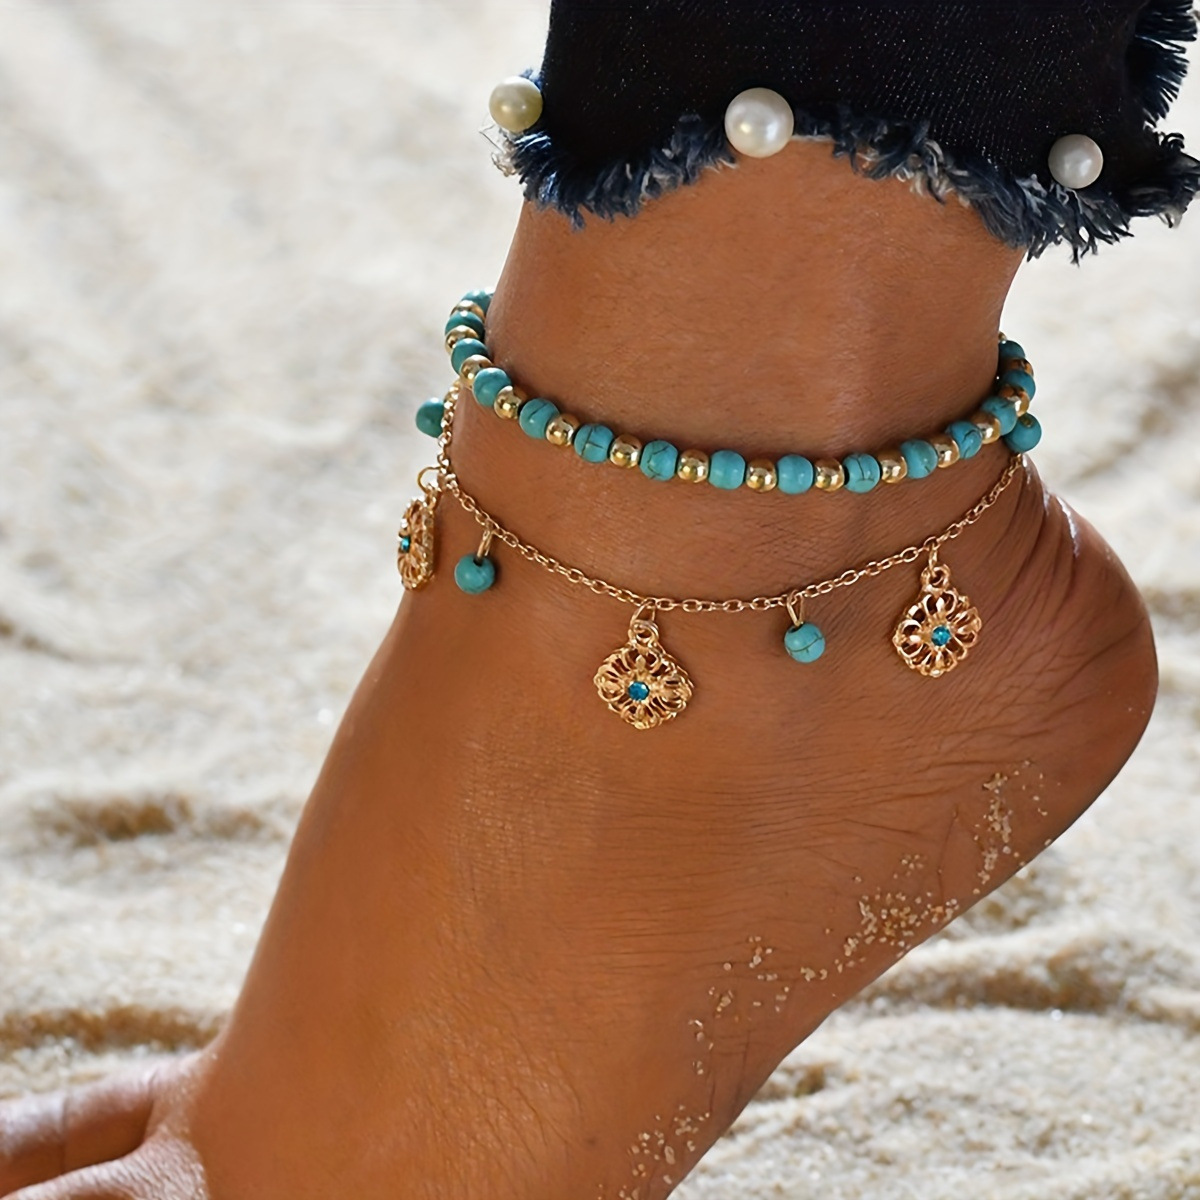 

2 Pcs Hollow Flower Shape Pendant Anklet Set With Turquoise Beads Simple Foot Jewelry Set